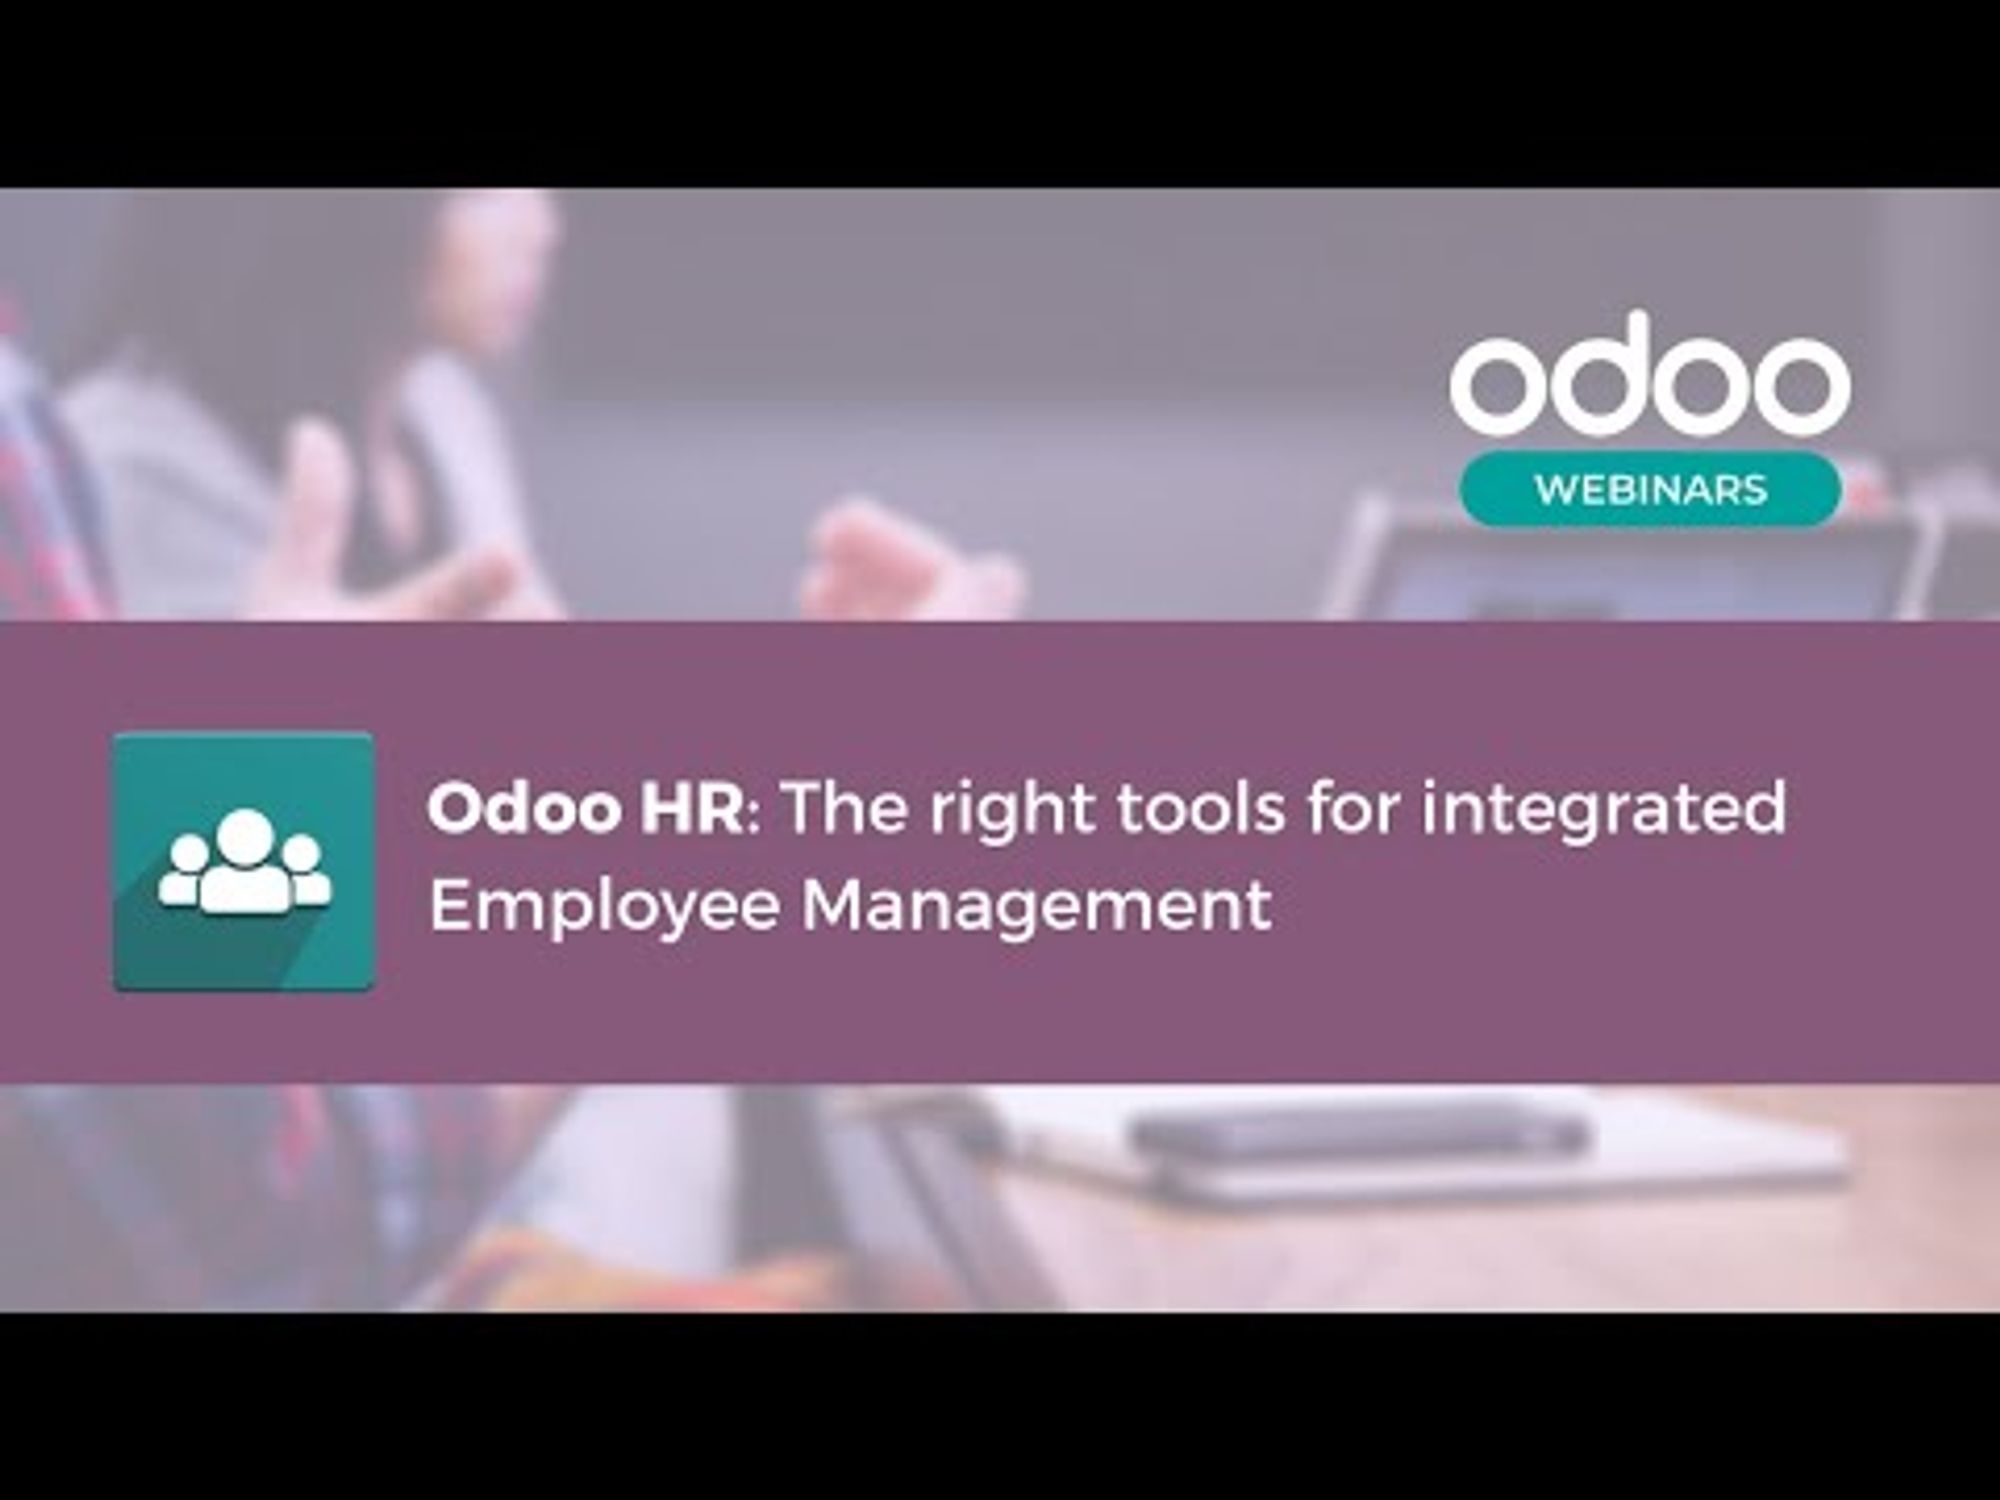 Odoo HR: The right tools for integrated Employee Management